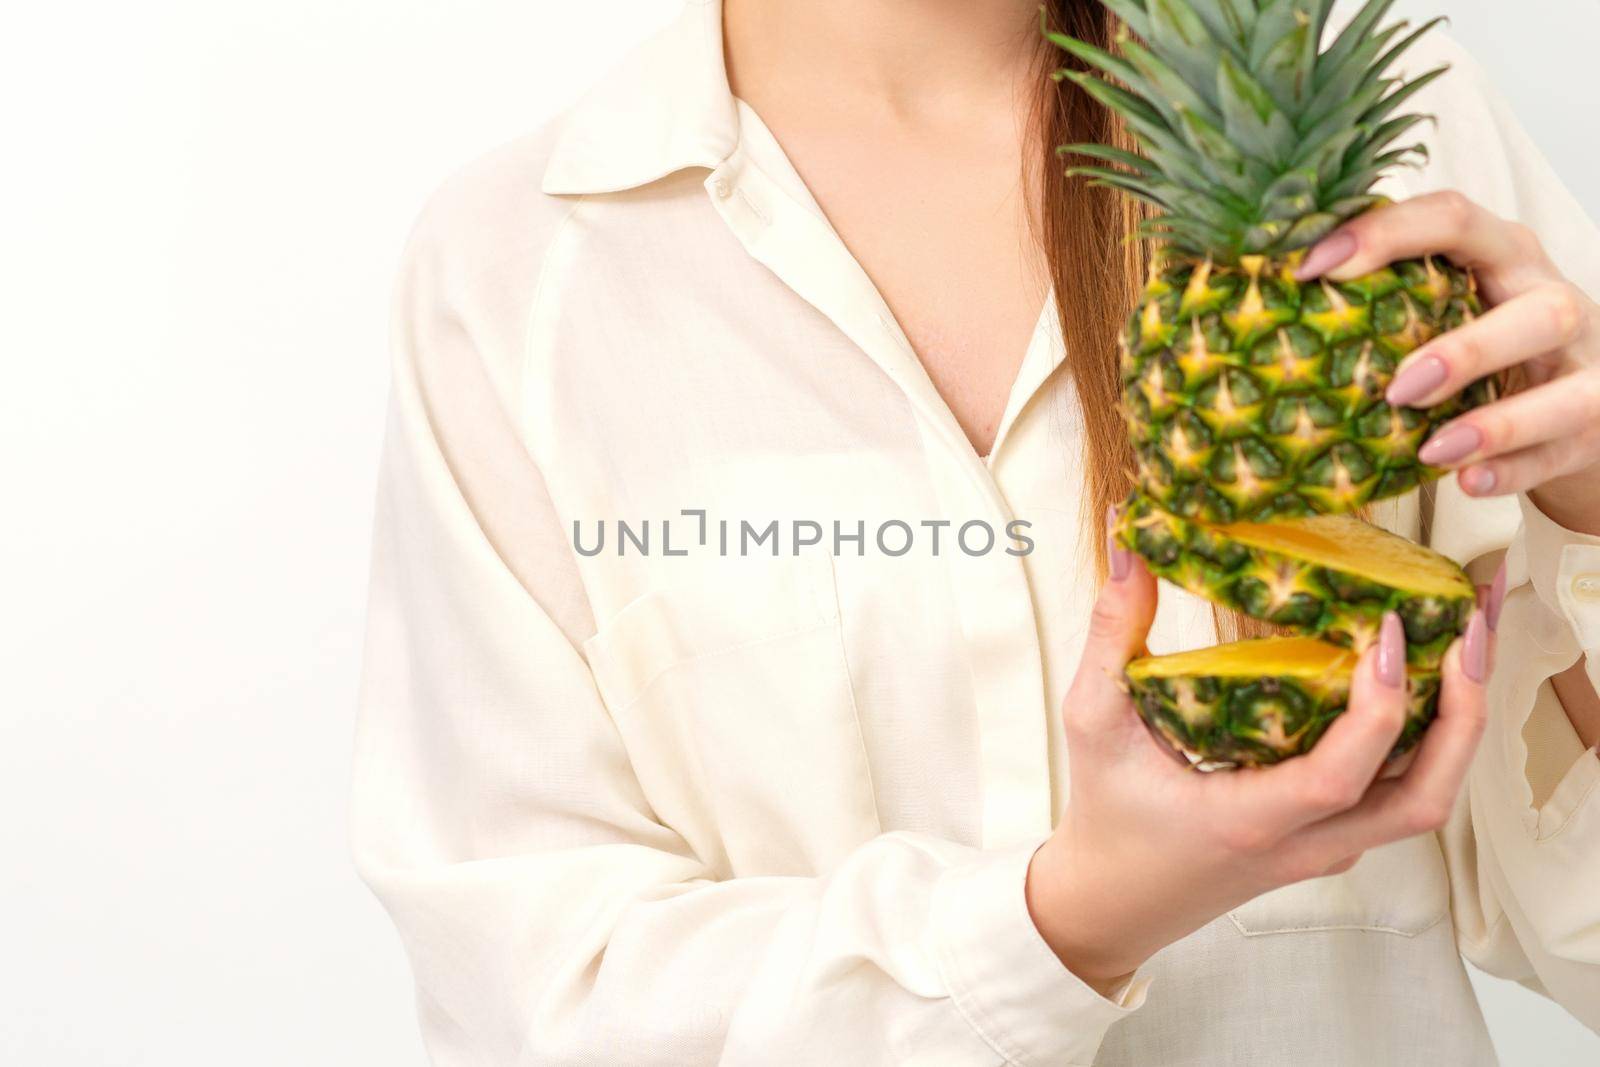 Beautiful young Caucasian woman holding pineapple and smiling, wearing a white shirt over white background. by okskukuruza